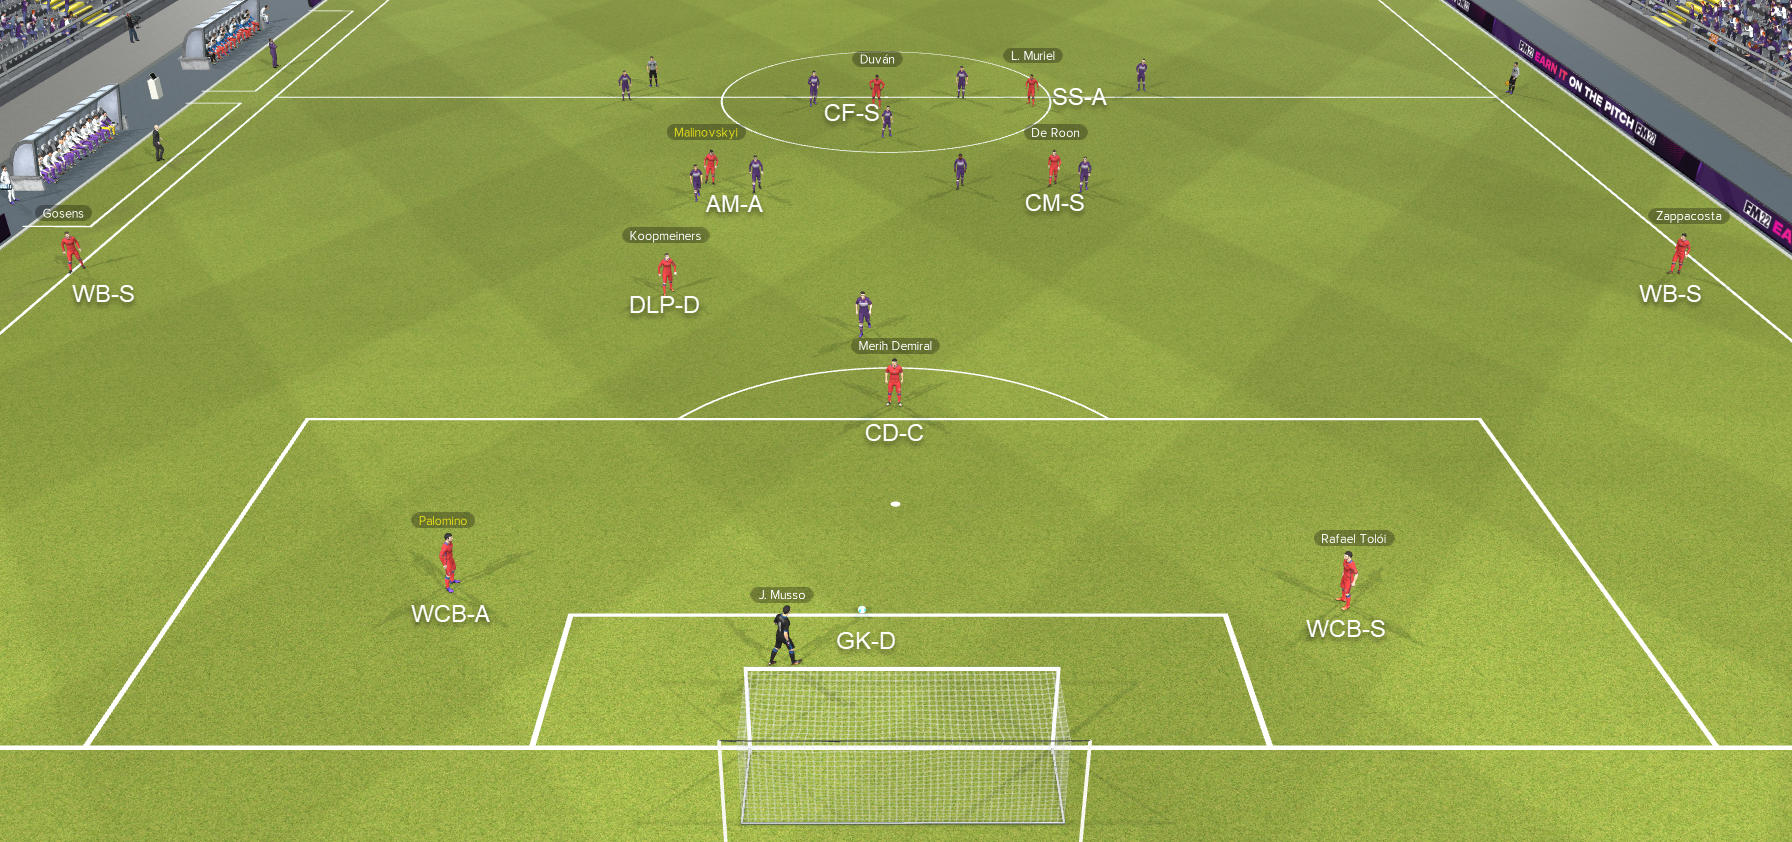 5-2-2-1 shape at a goal kick, before it morphs in possession